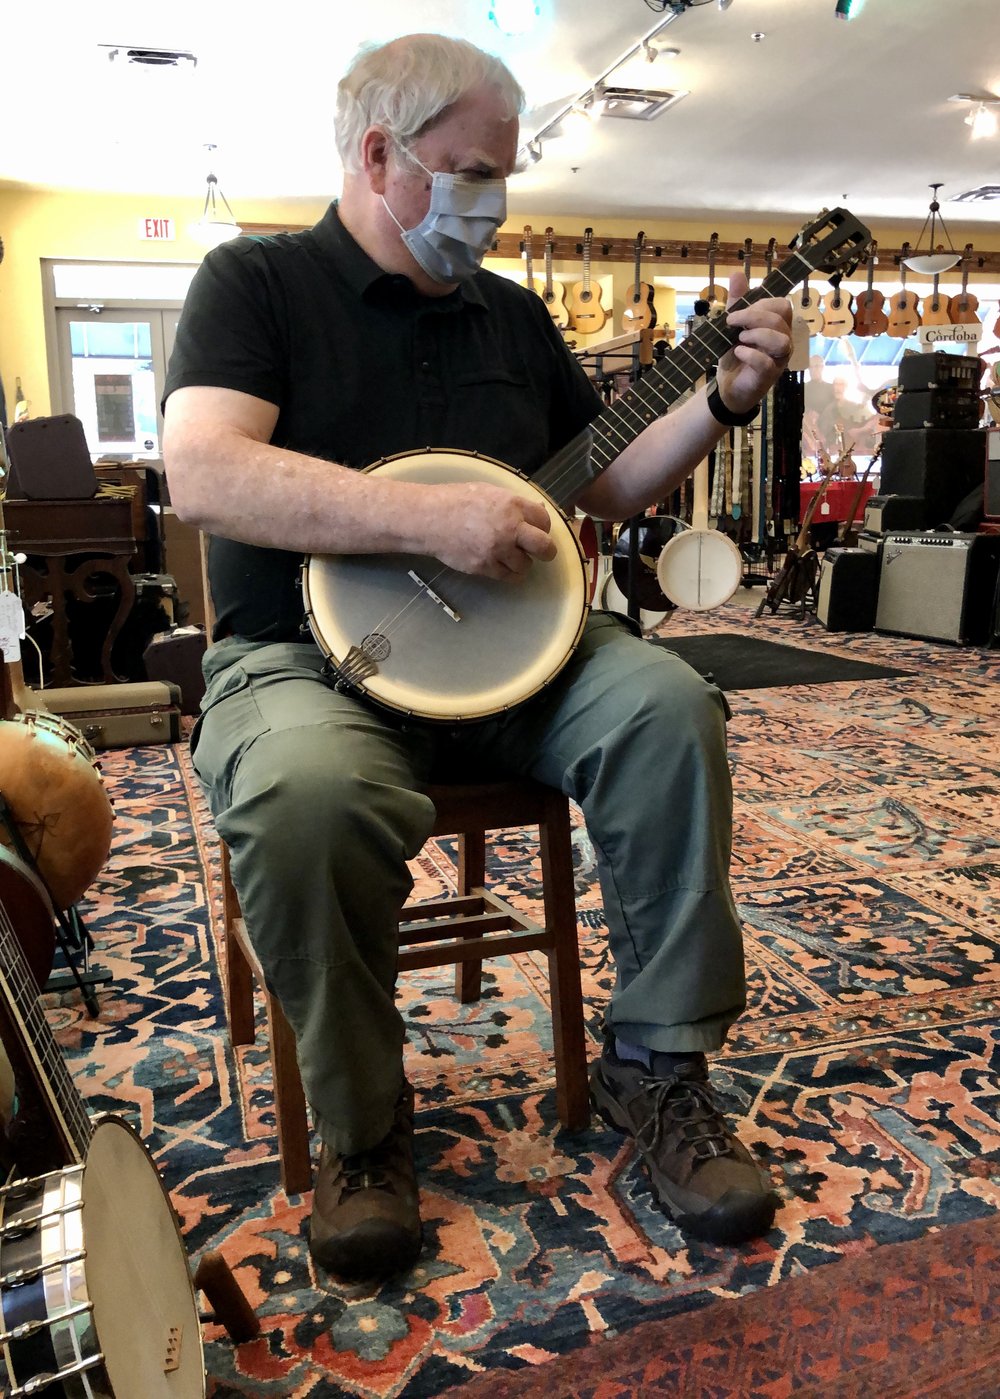 &hellip;.a happy customer left with my favorite banjo on Saturday&hellip;.thanks Mike!&nbsp;I gue...